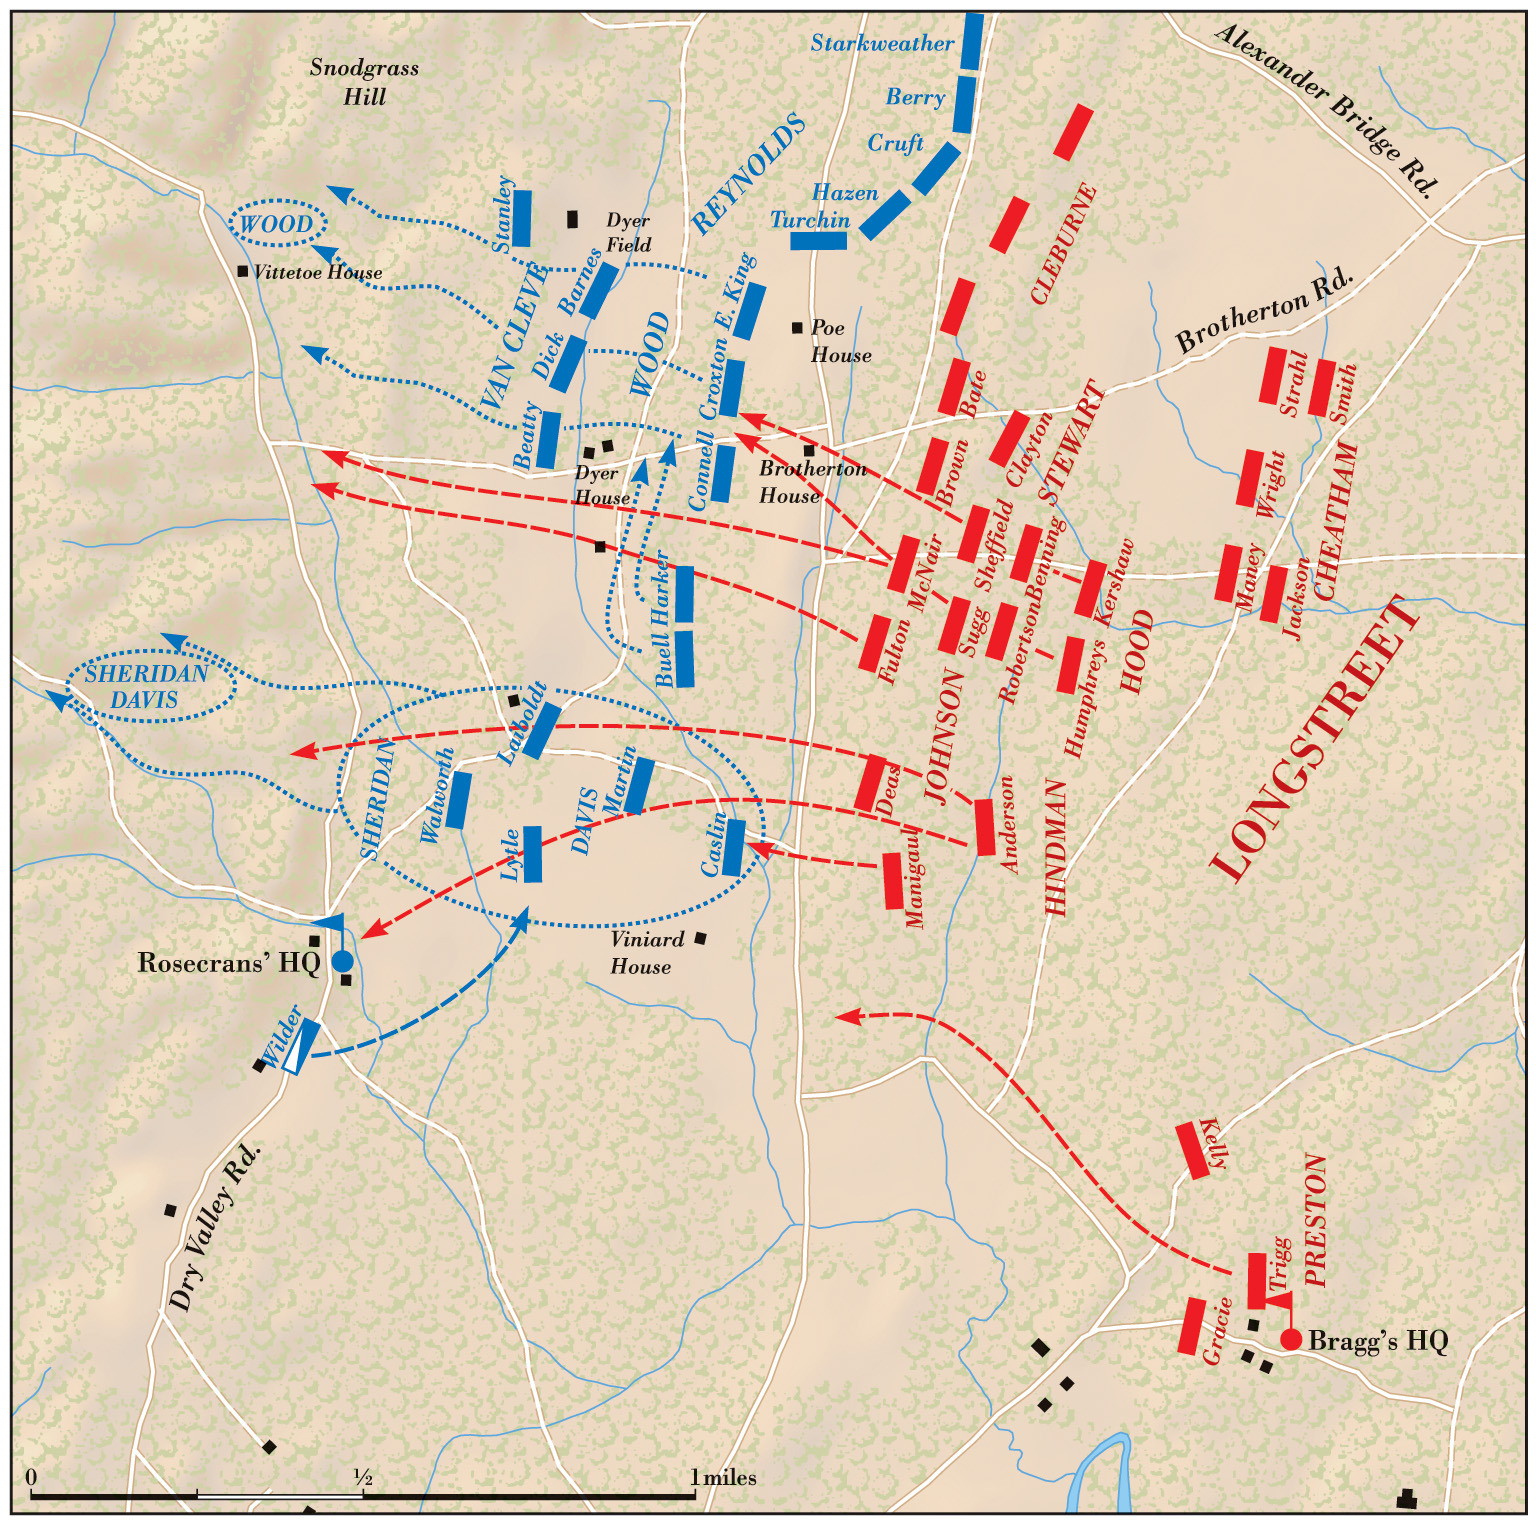 Longstreet’s advance went through the center of the Union line, sending units back in confused retreat. 